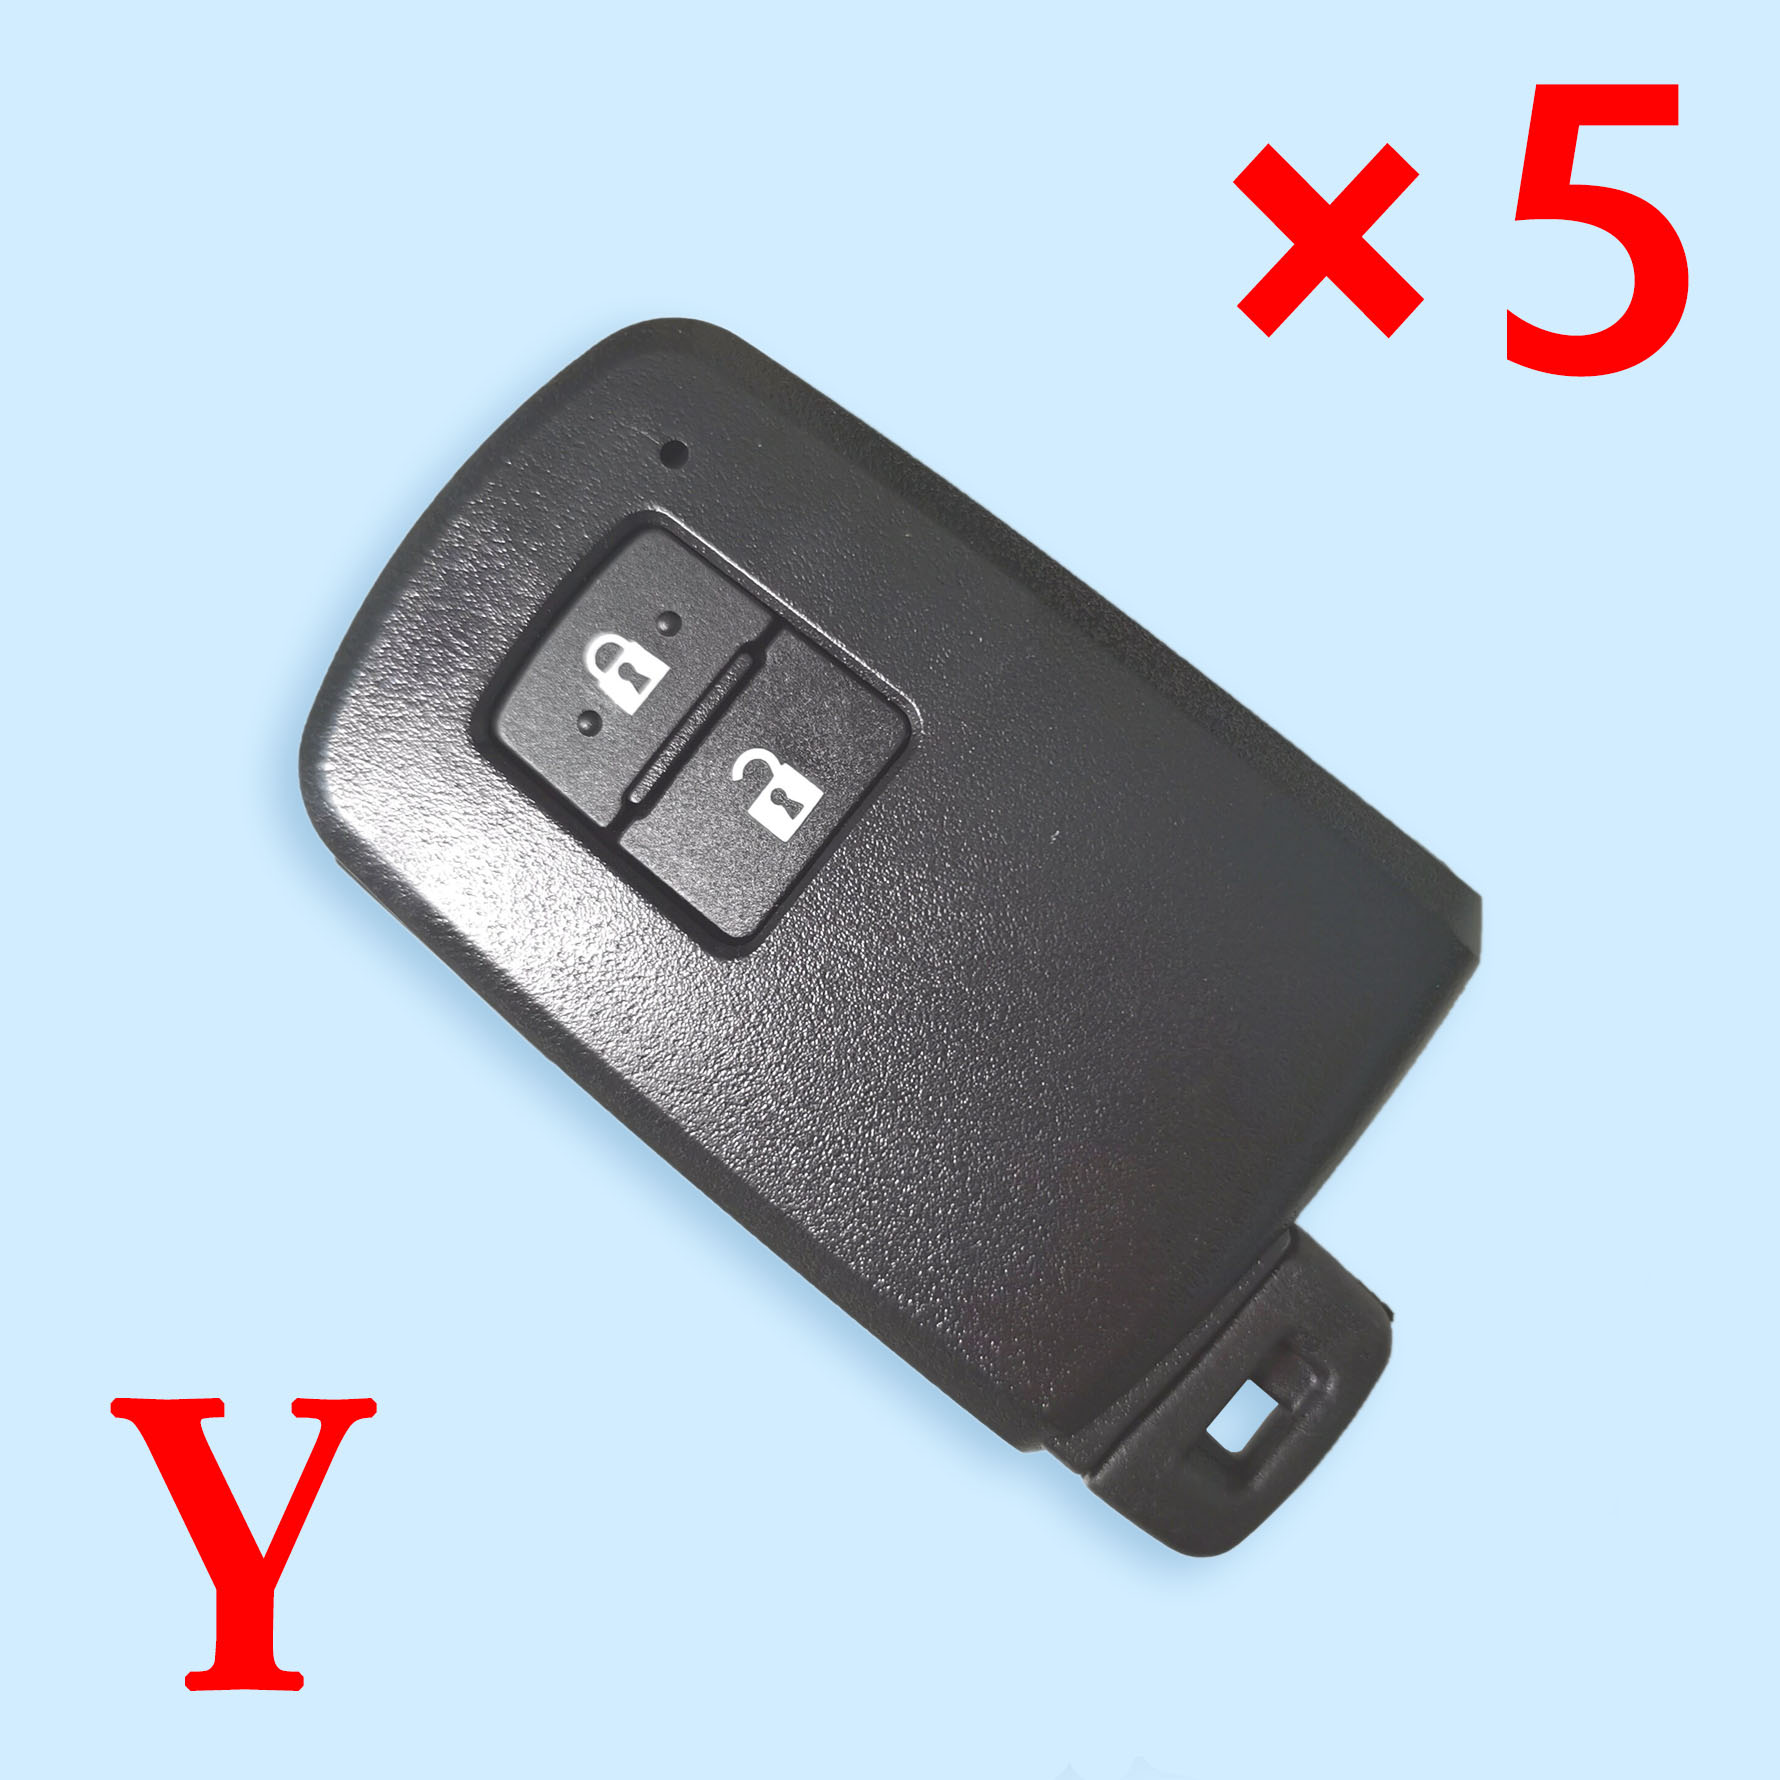 2 Buttons Smart Key Shell for Toyota - Suitable for Xhorse VVDI PCB - Pack of 5